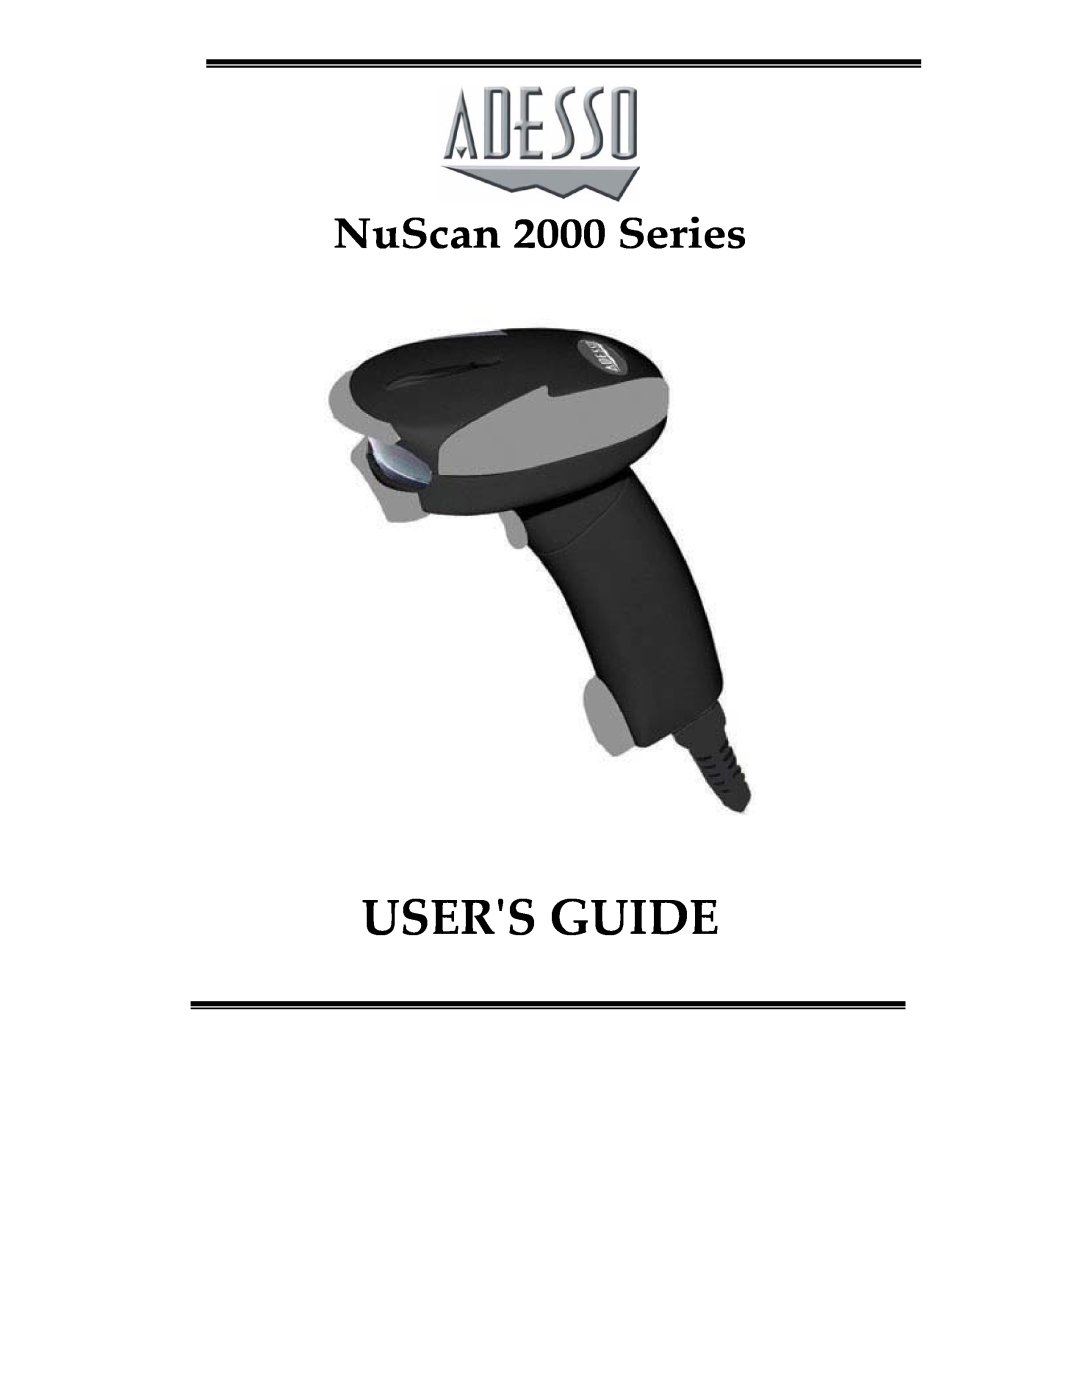 Adesso manual Users Guide, NuScan 2000 Series 